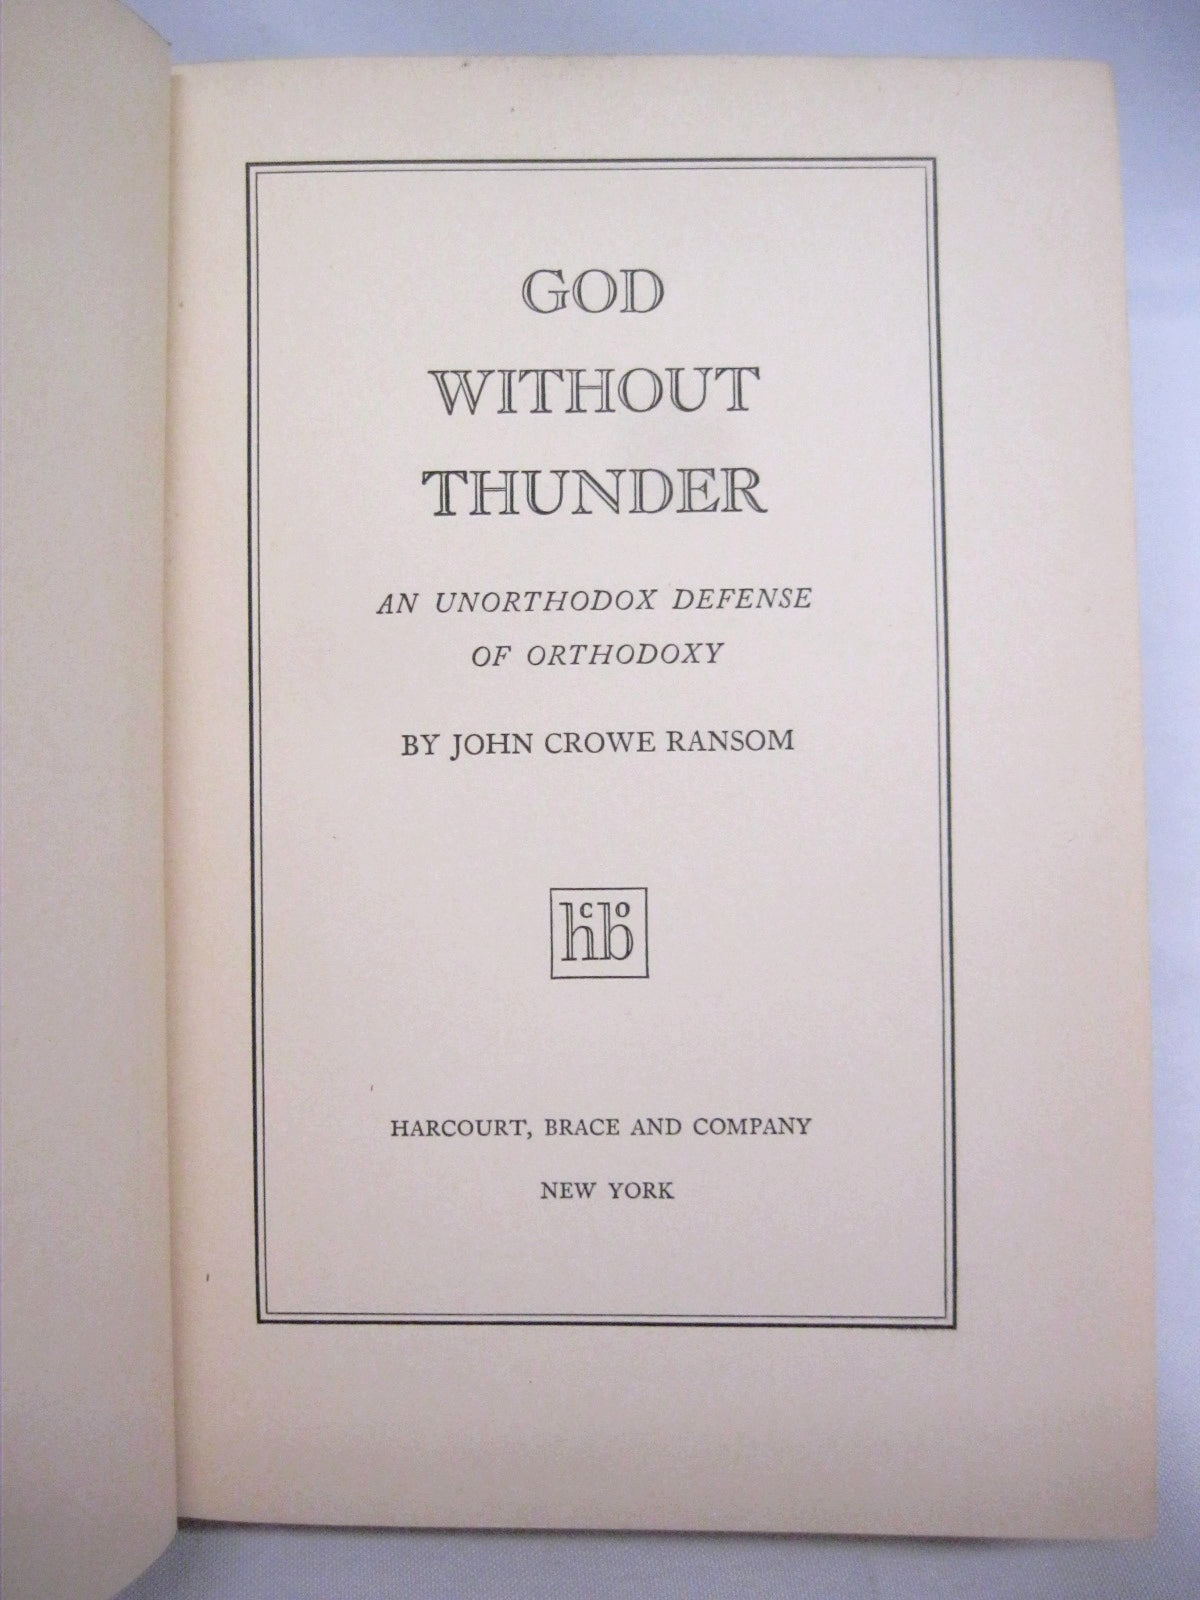 God Without Thunder by John Crowe Ransom